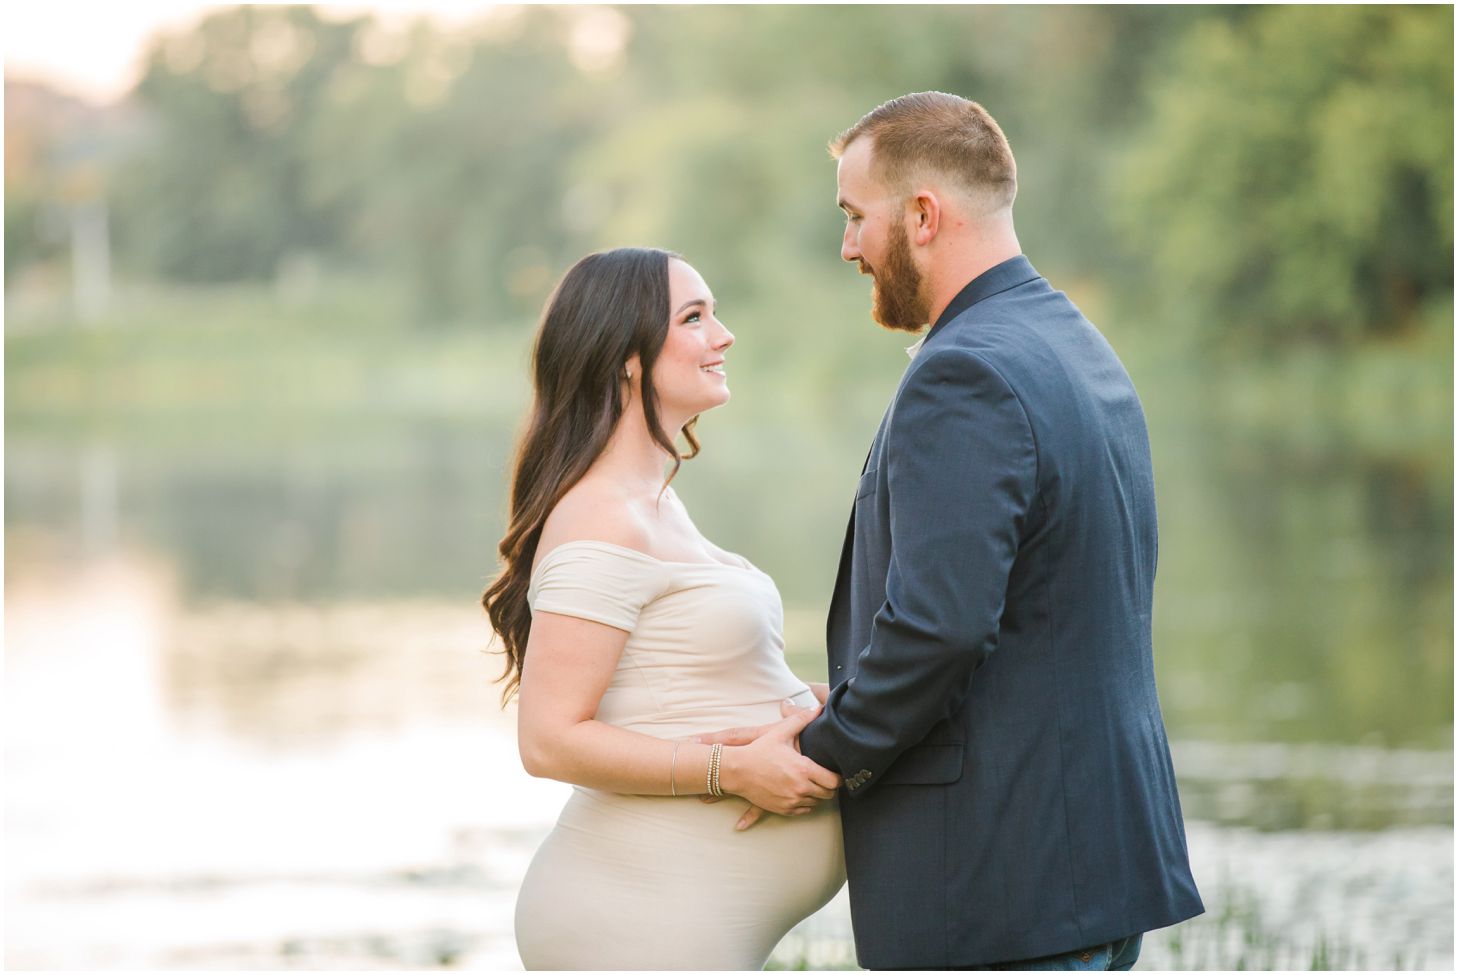 Couple in front of lake for maternity pictures at North Park in Pittsburgh